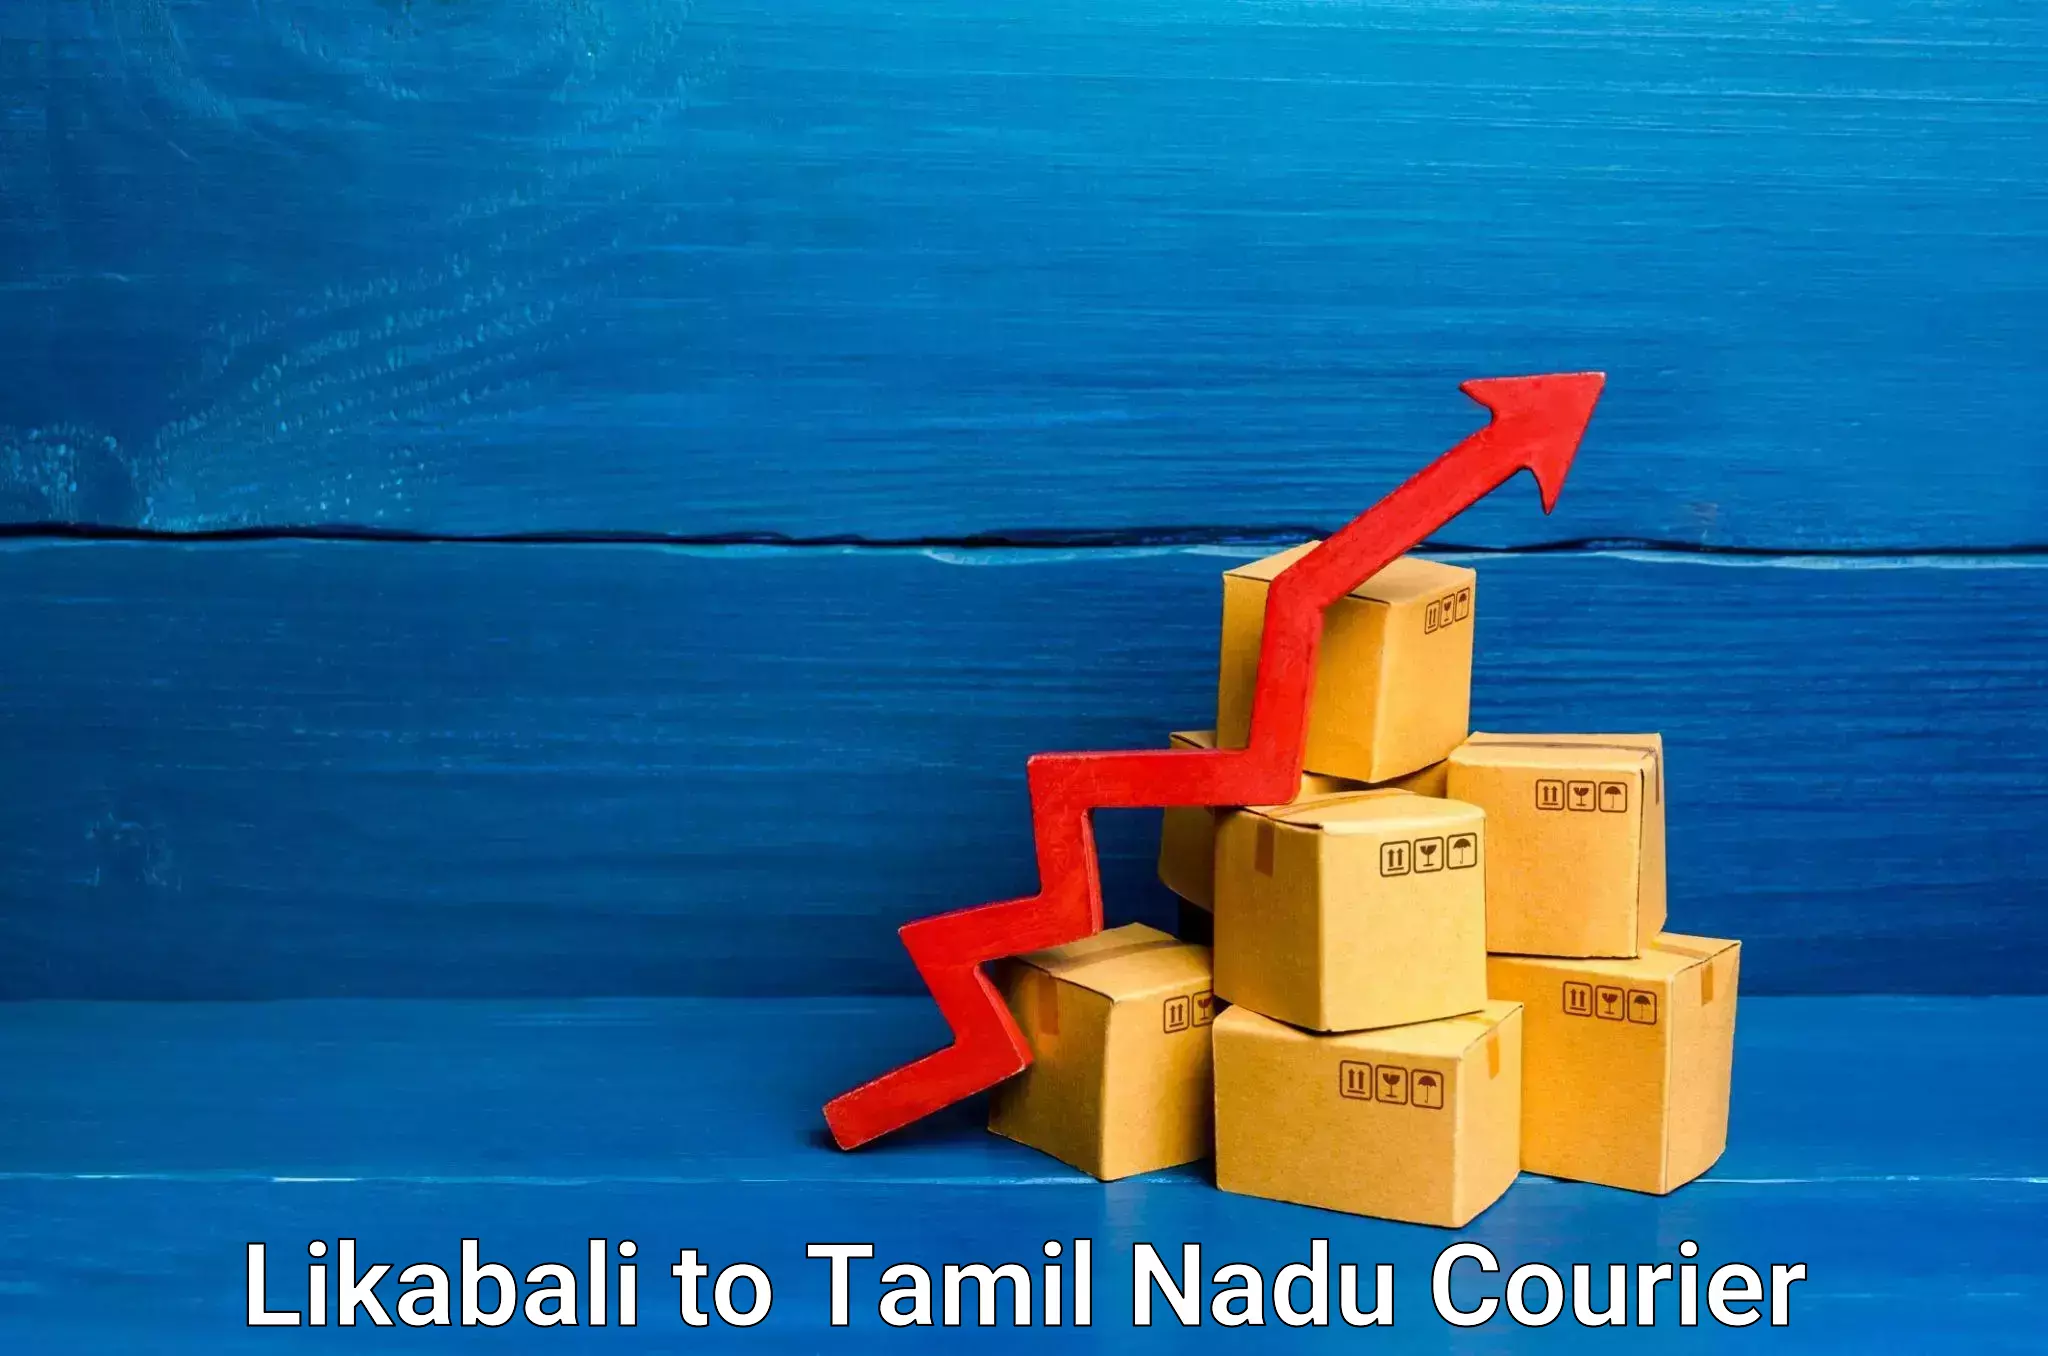 Reliable courier service Likabali to Karur